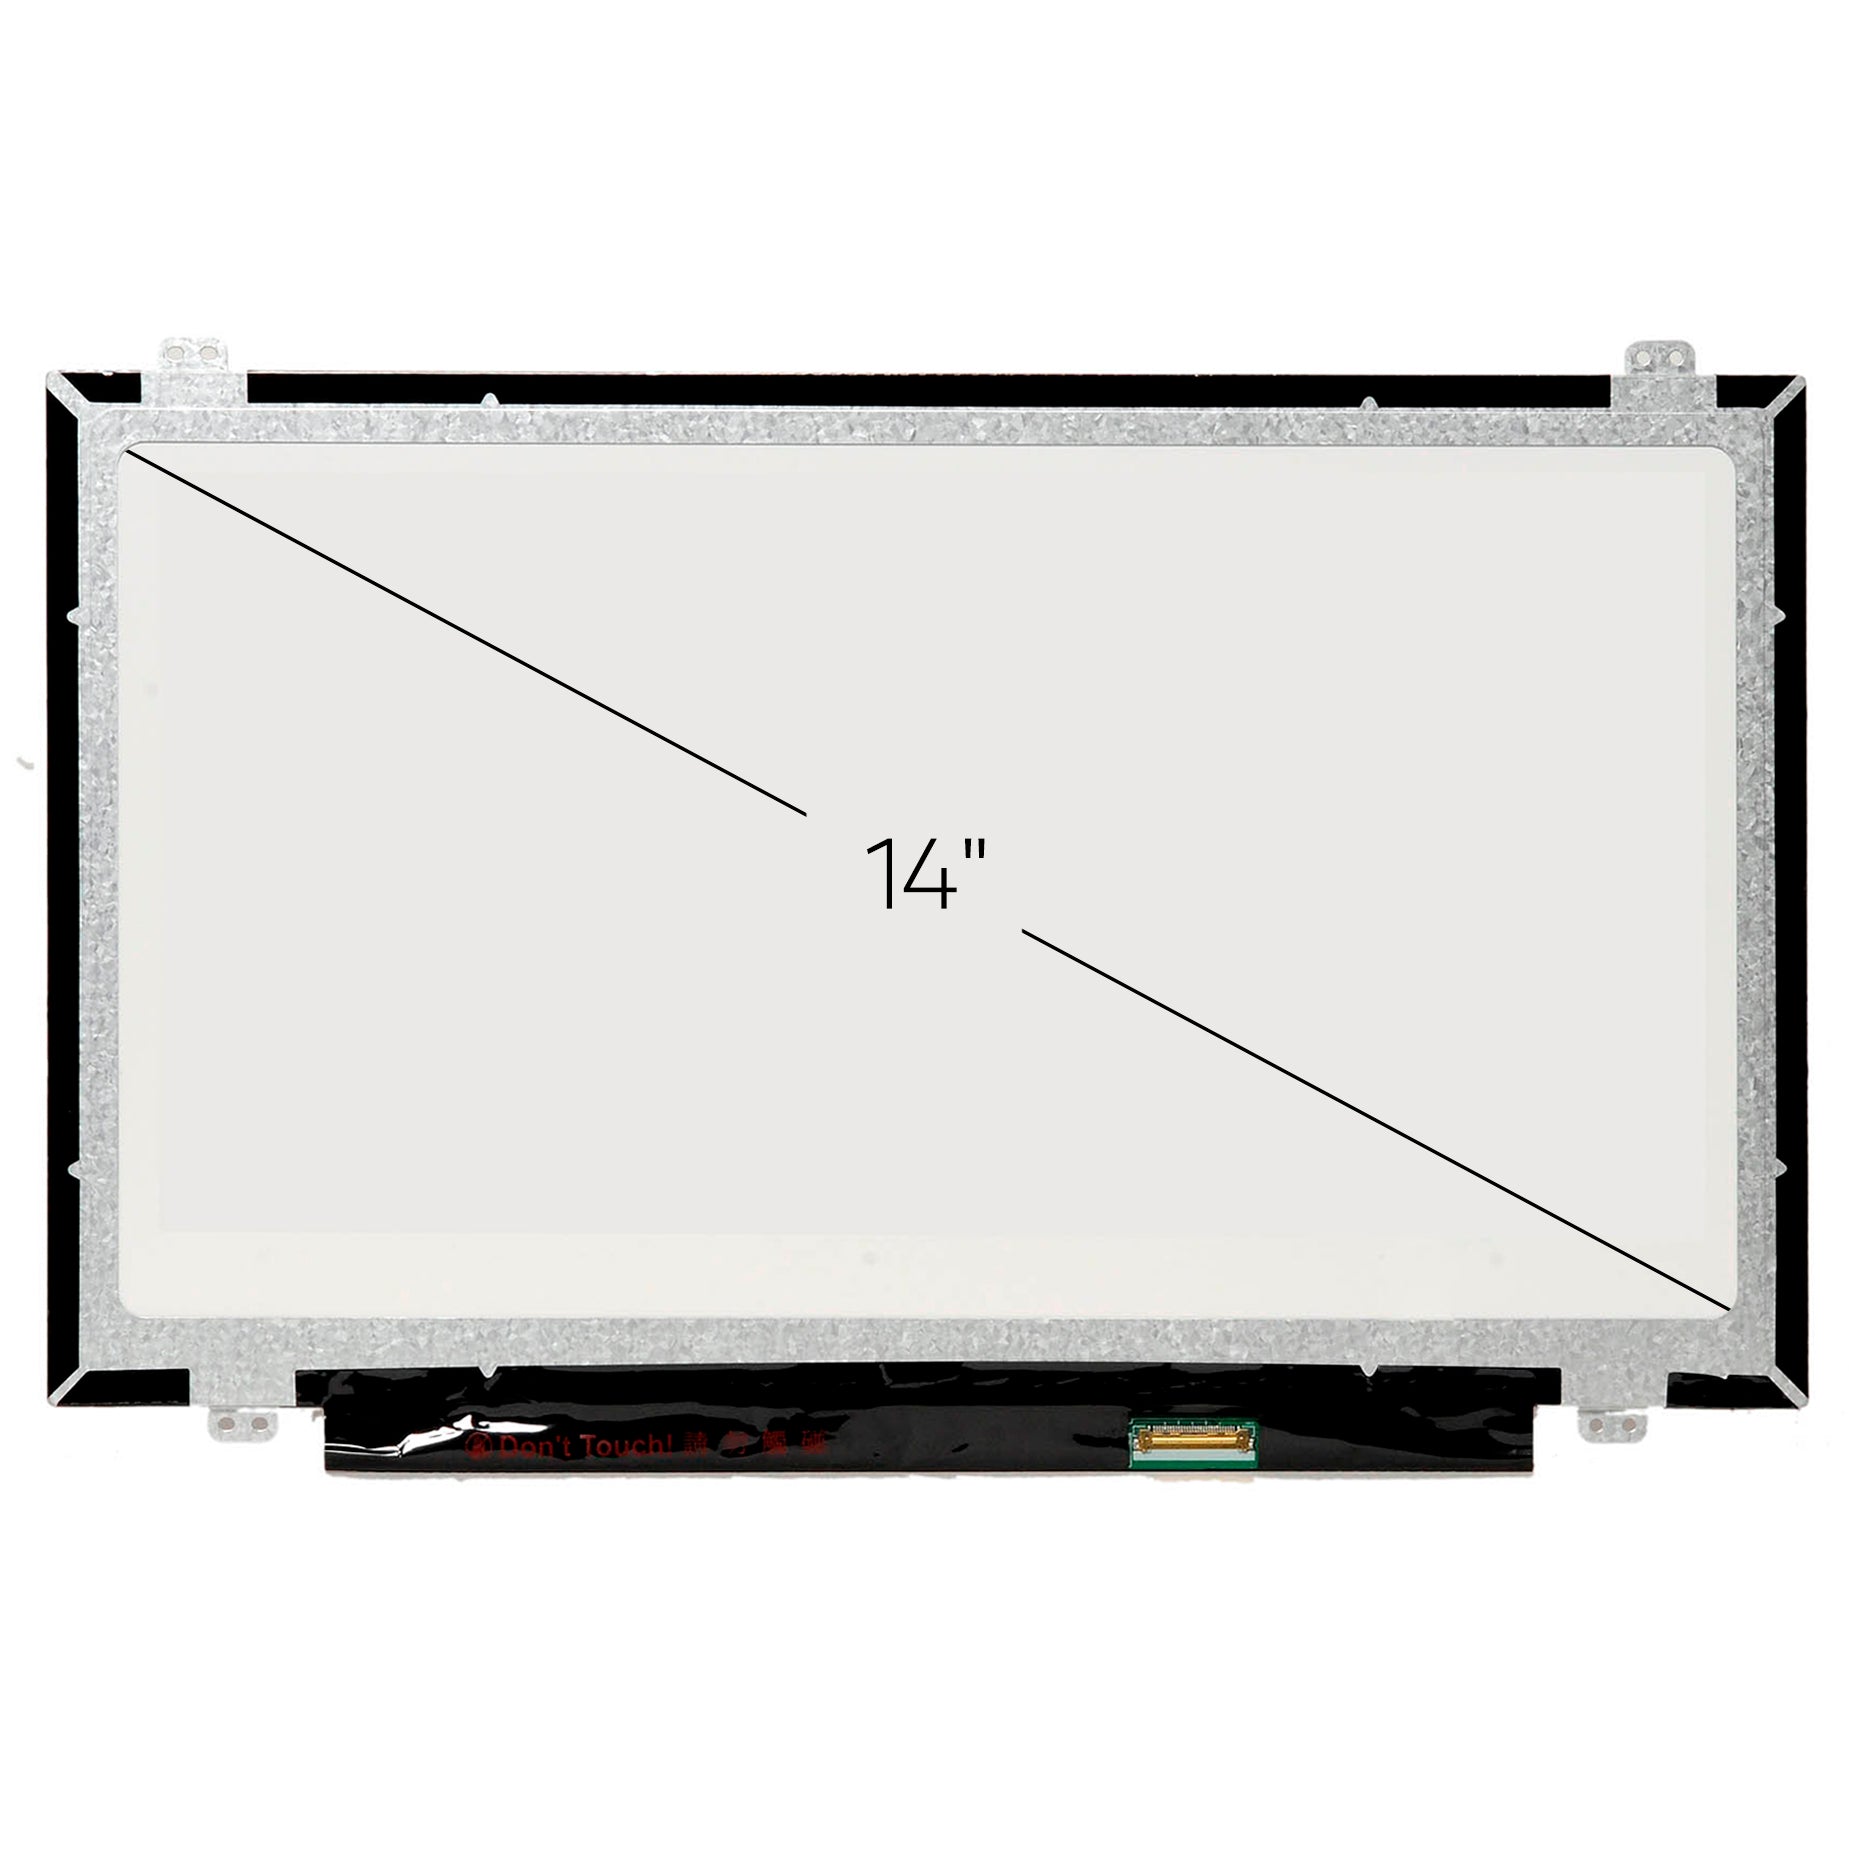 Screen Replacement for LP140WH8(TP)(G1) HD 1366x768 Glossy LCD LED Display